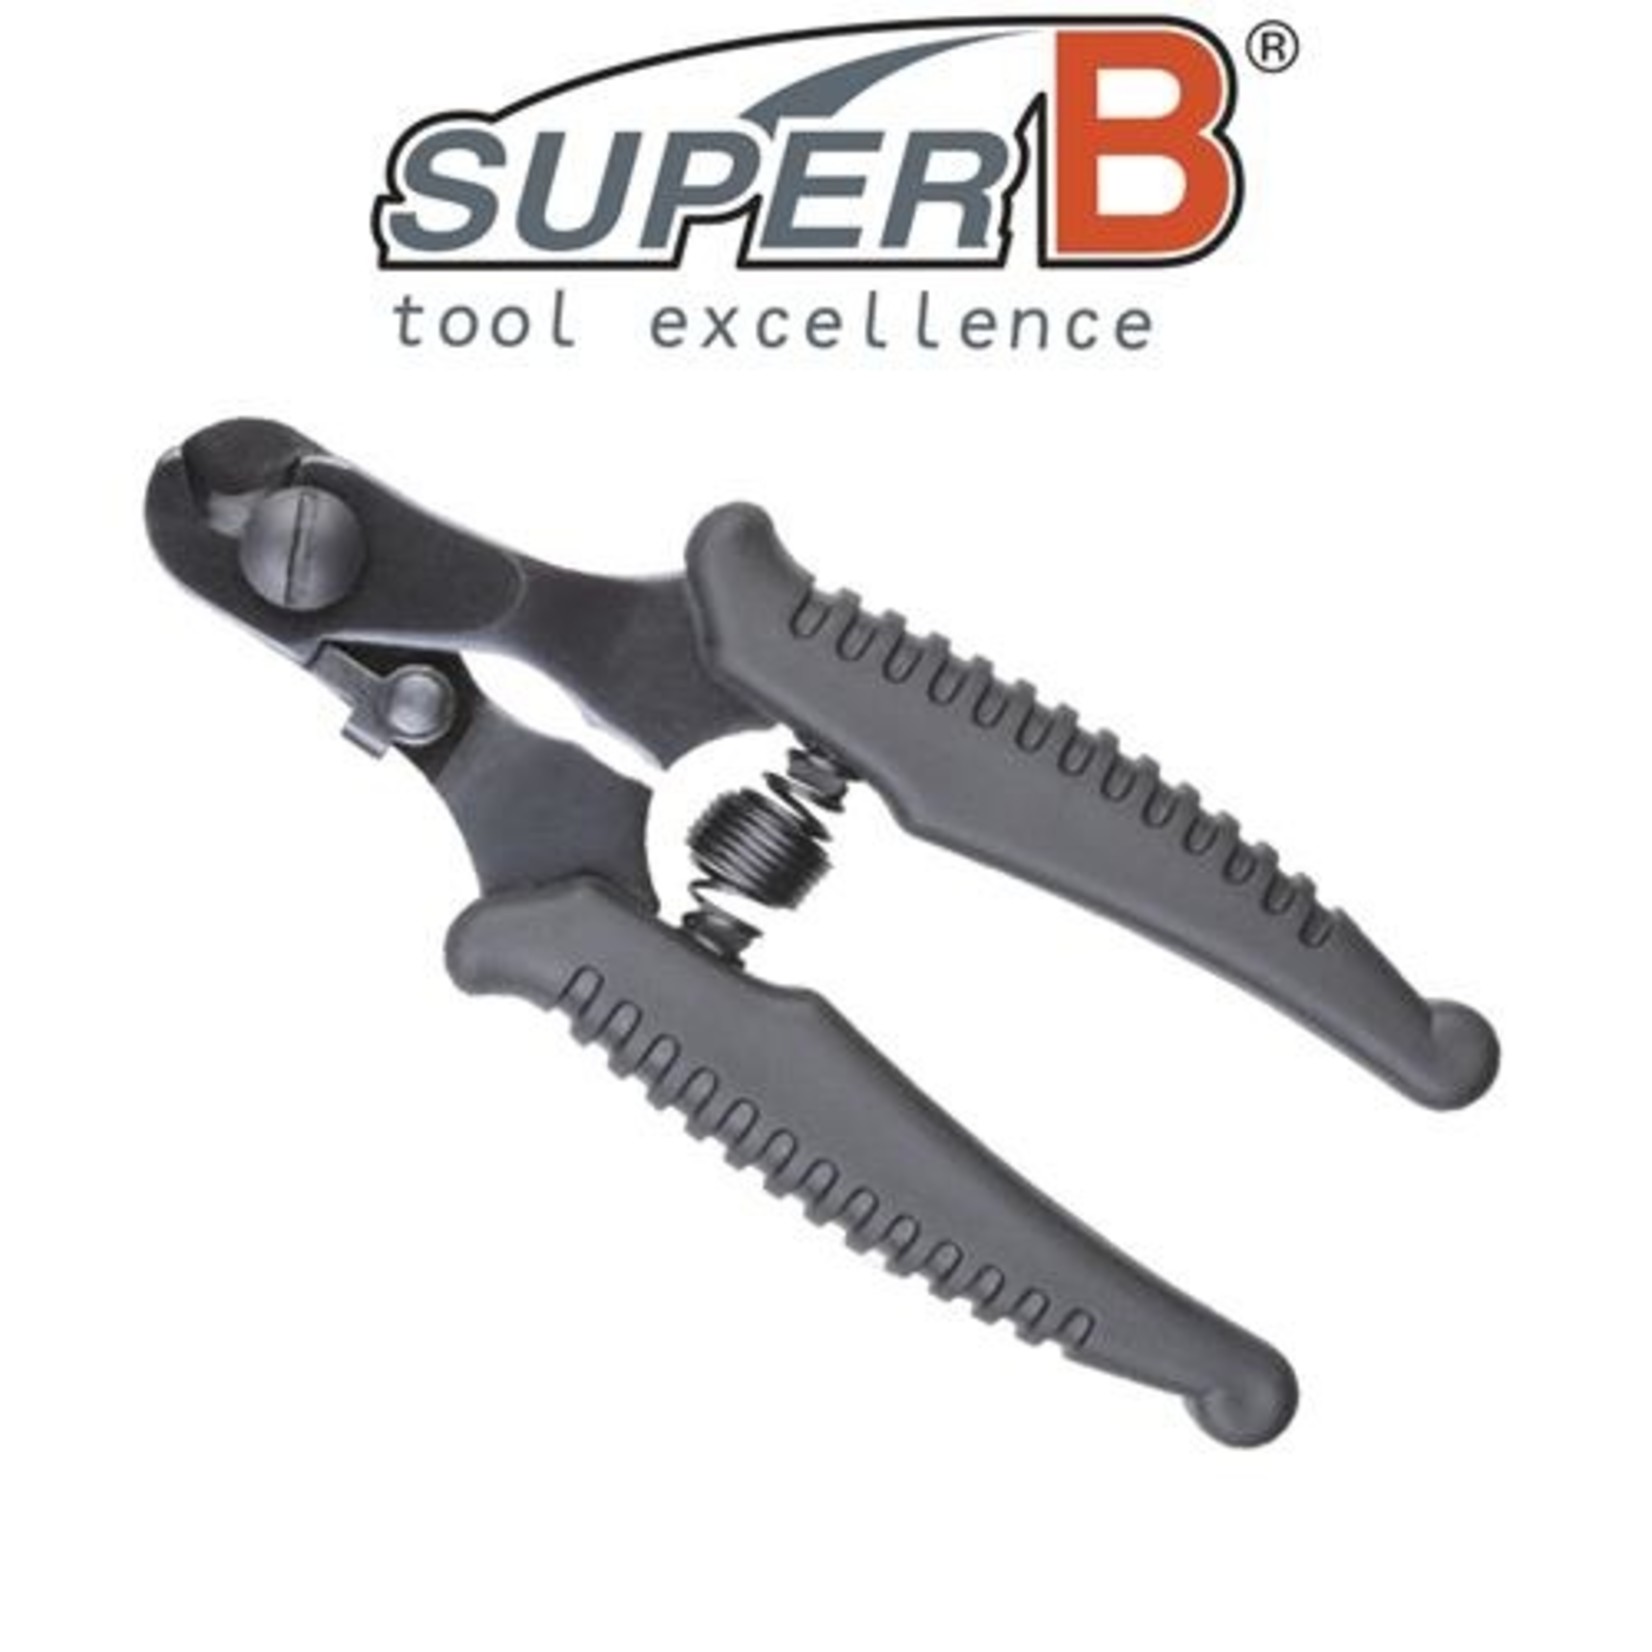 Super B SuperB Economical Cable Cutter And Housing End Caps - Bike Tool